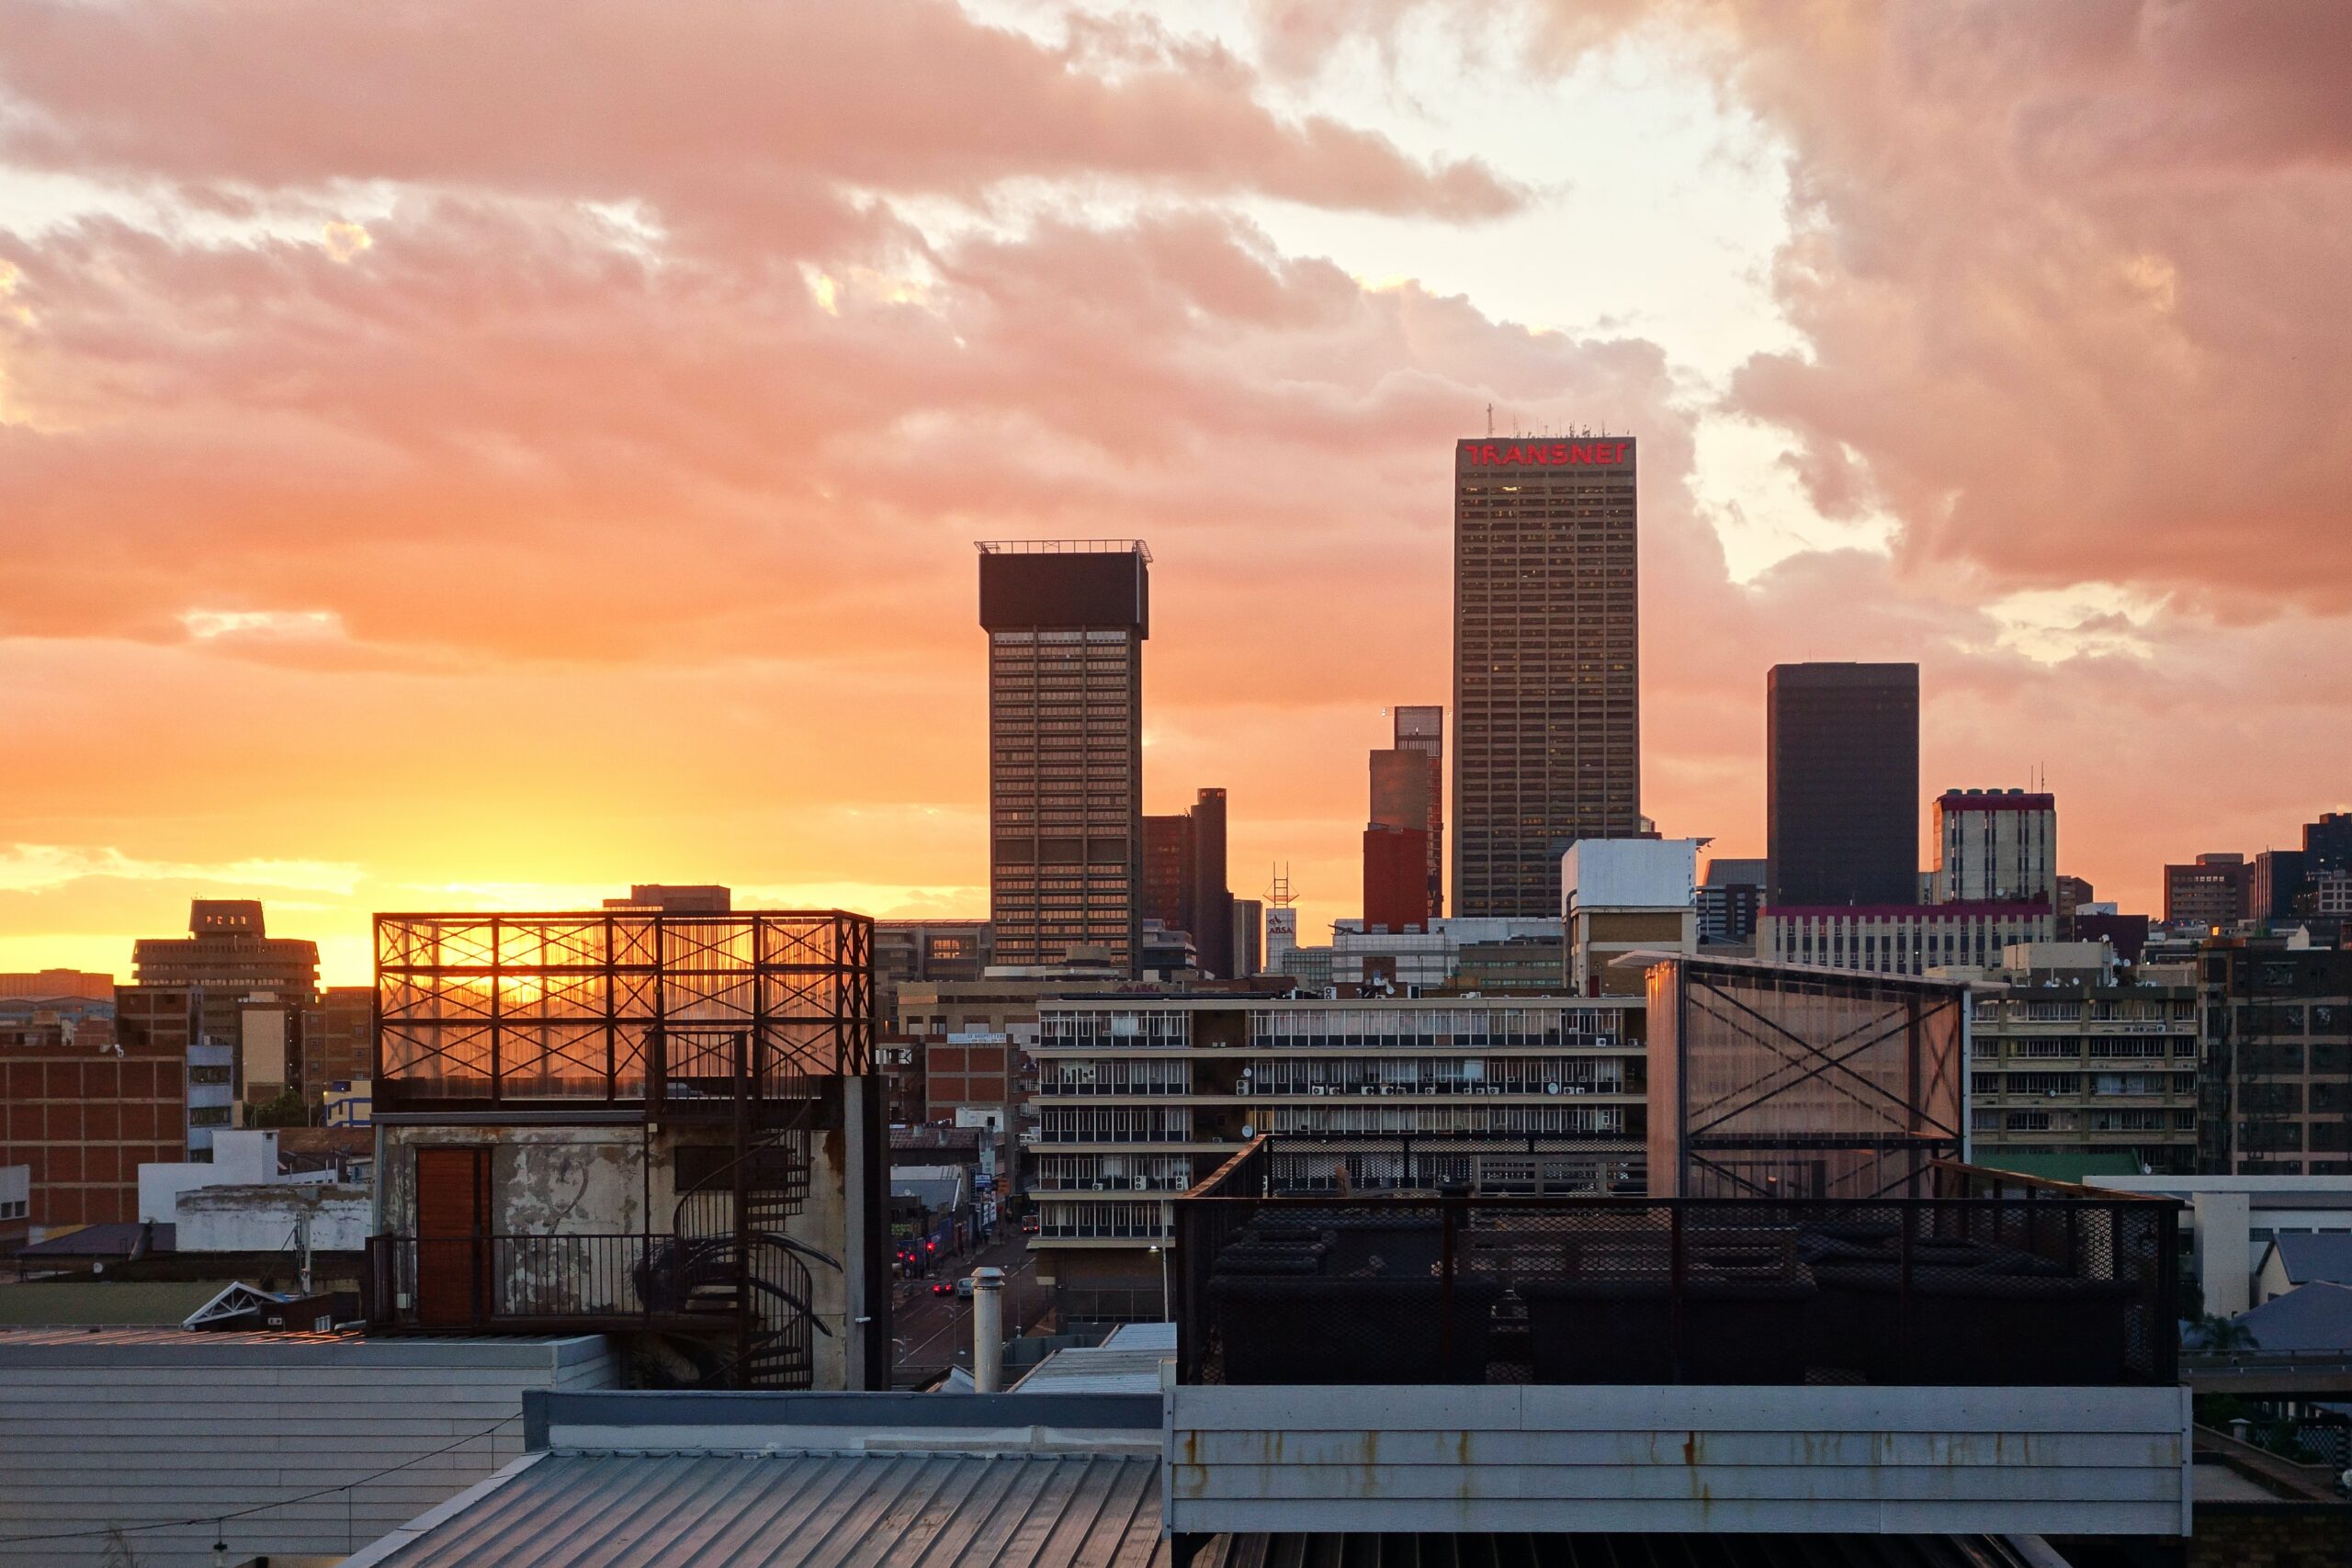 Best things to do in Johannesburg: An Extensive Guide to the City of Gold